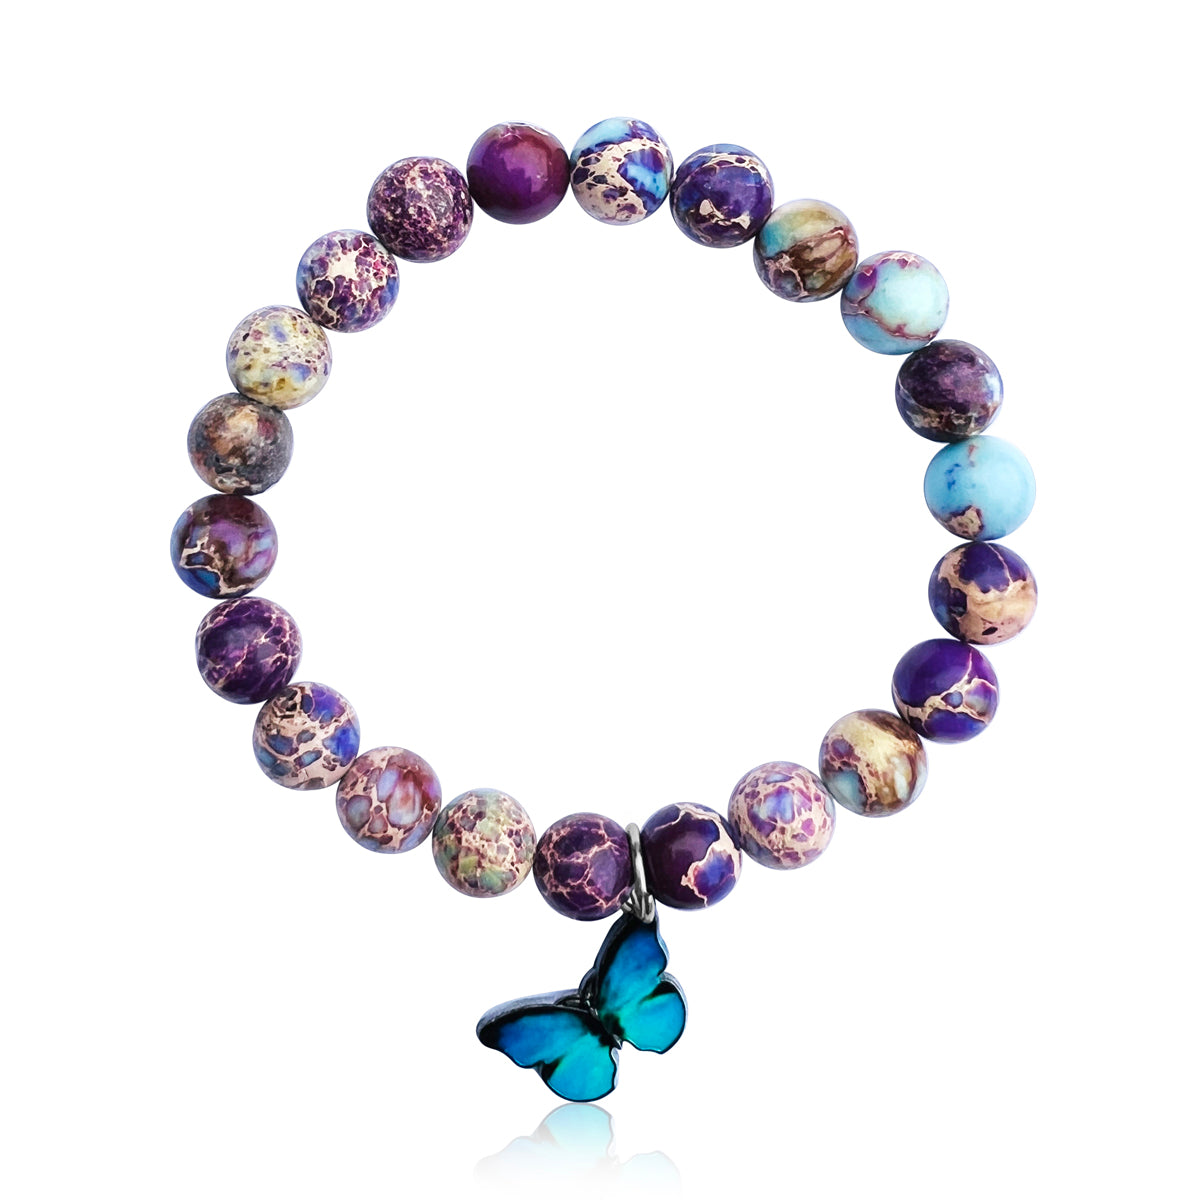 Let the "Joyful Butterfly Dance Bracelet" be your mindful companions, encouraging you to dance through life with the carefree spirit of a butterfly.